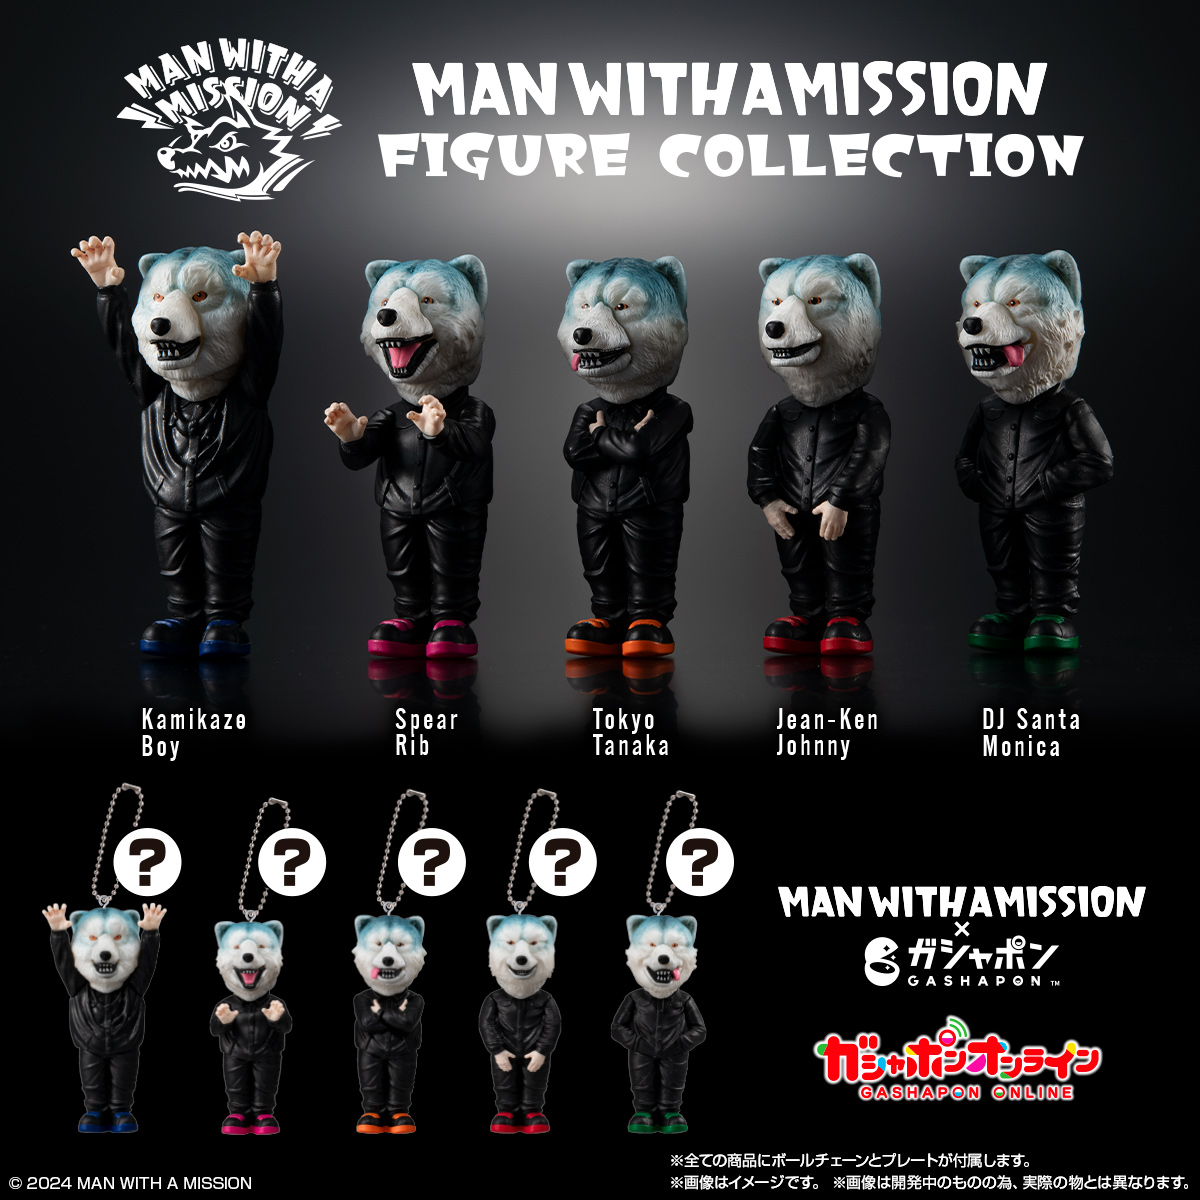 MAN WITH A MISSION FIGURE COLLECTION | ナムコパークス オンライン